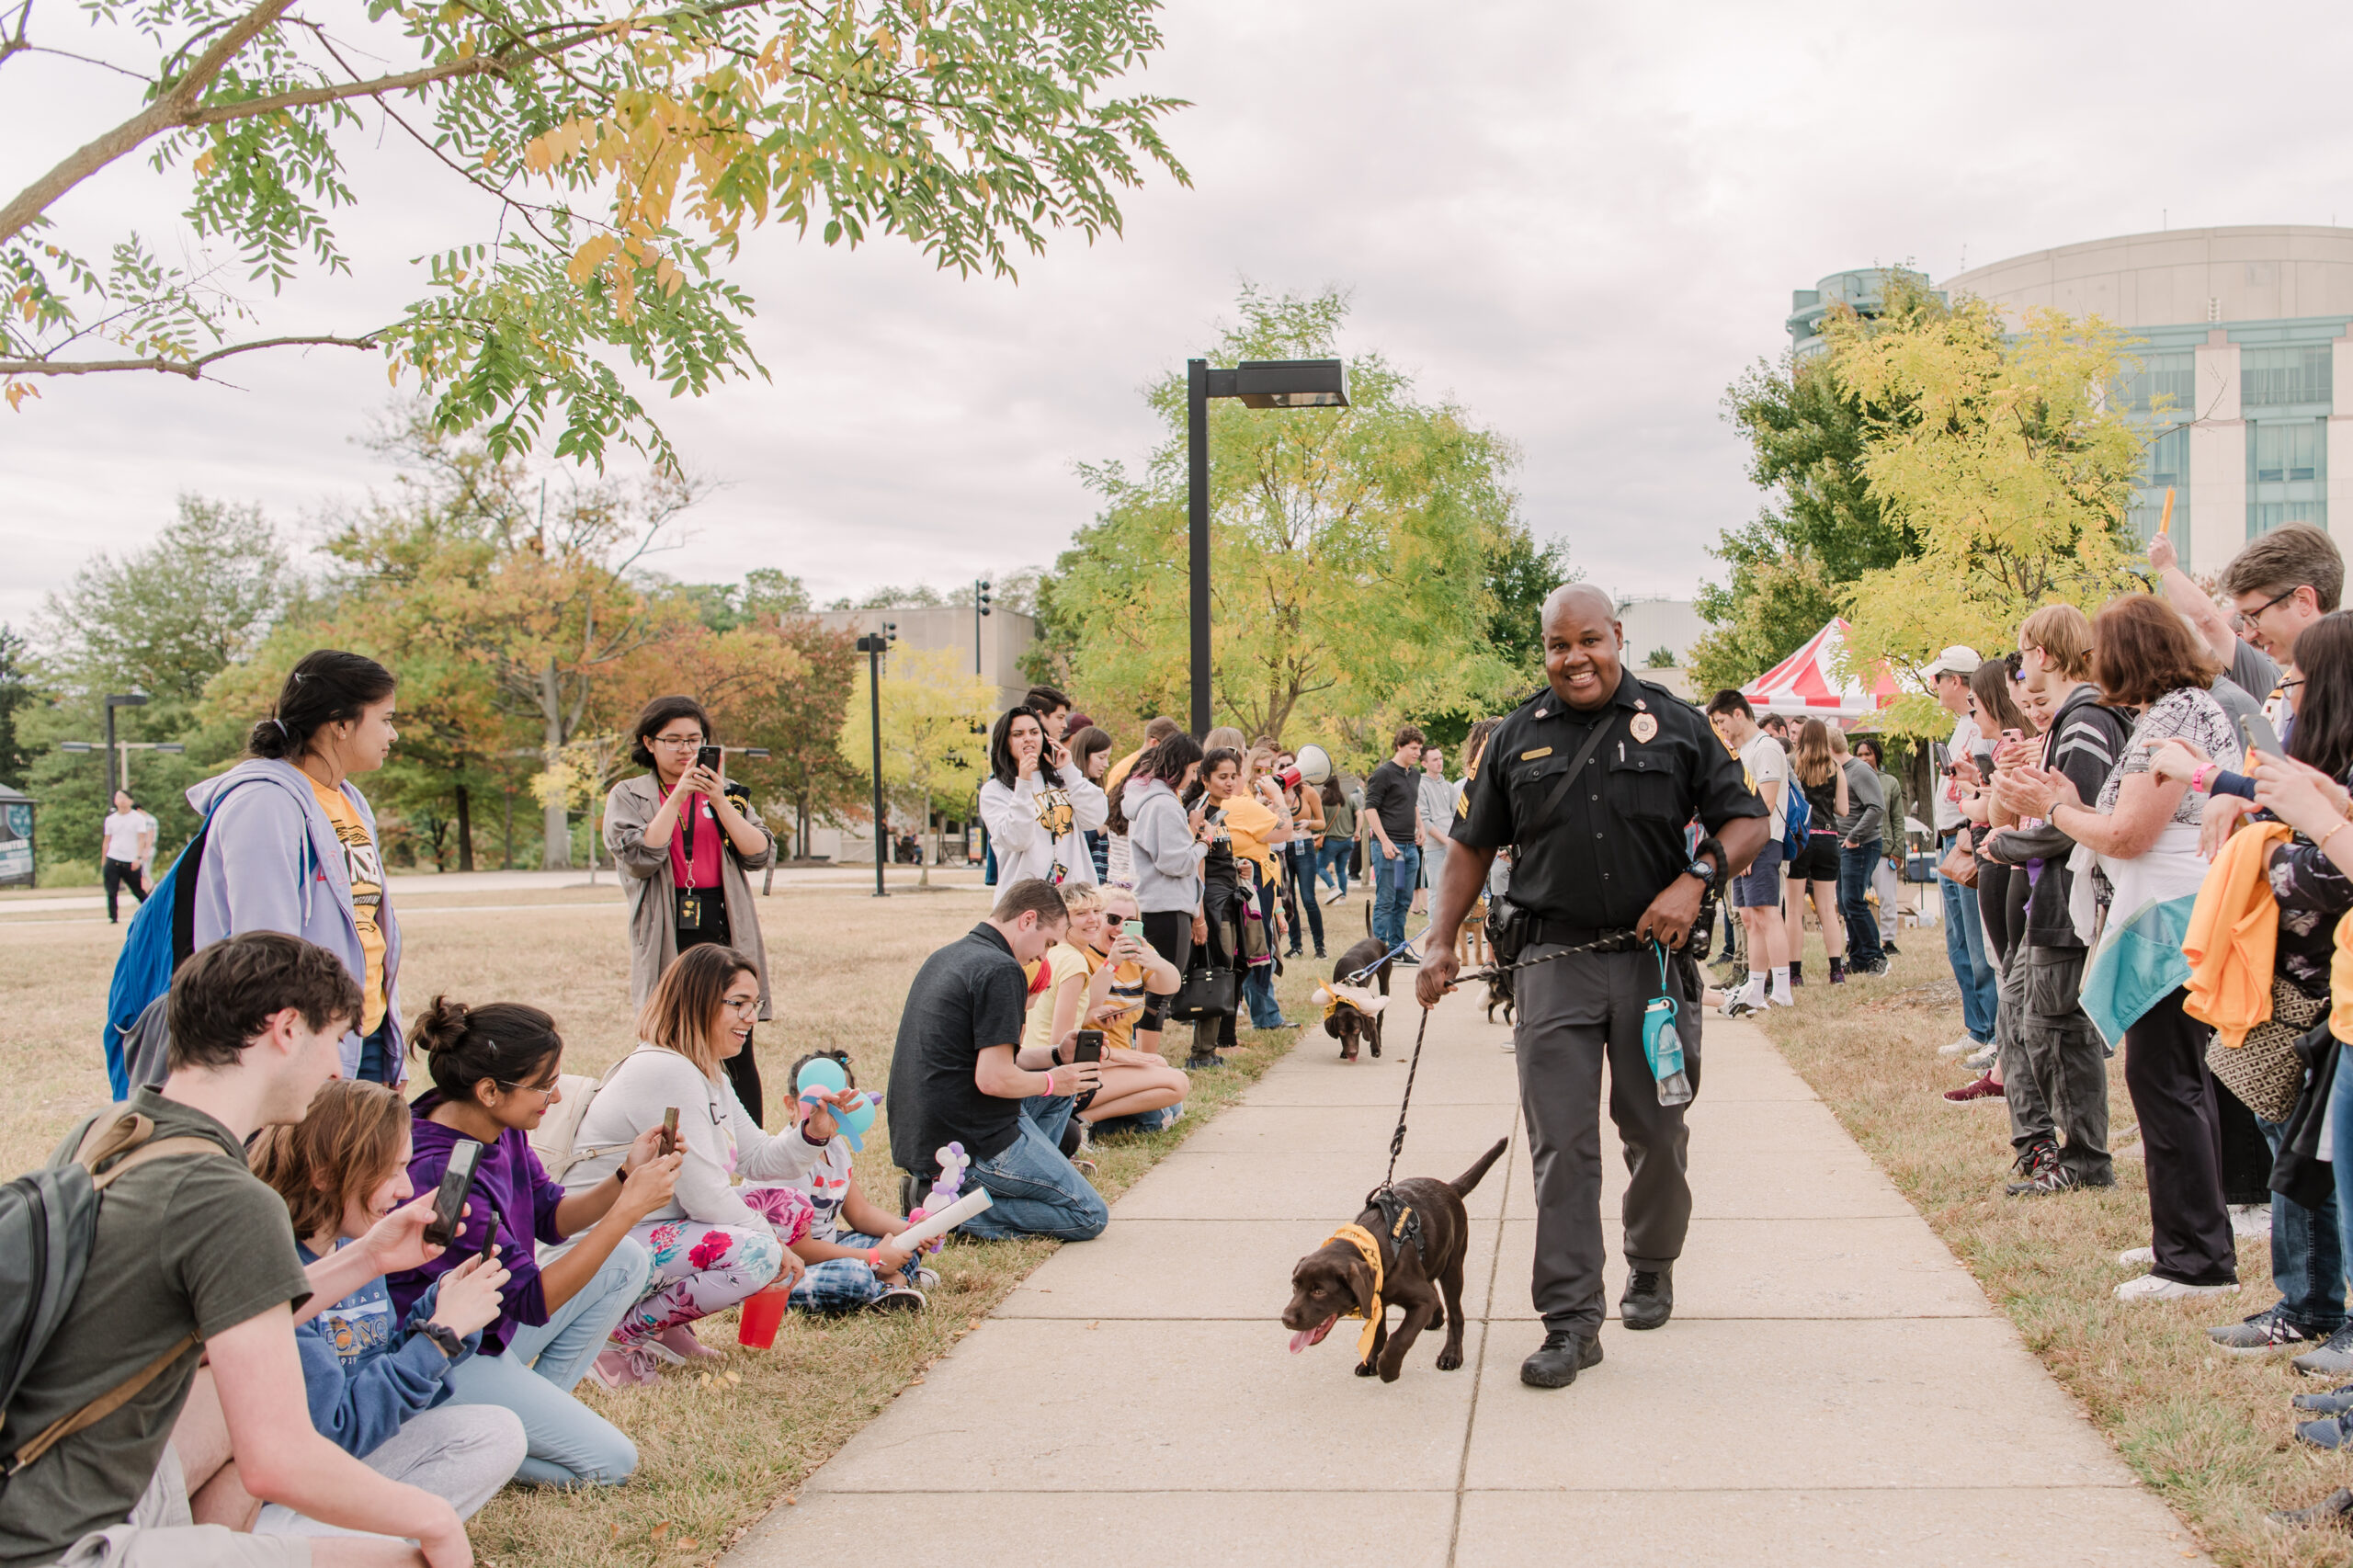 Officer Cheatum and Chip at puppy parade